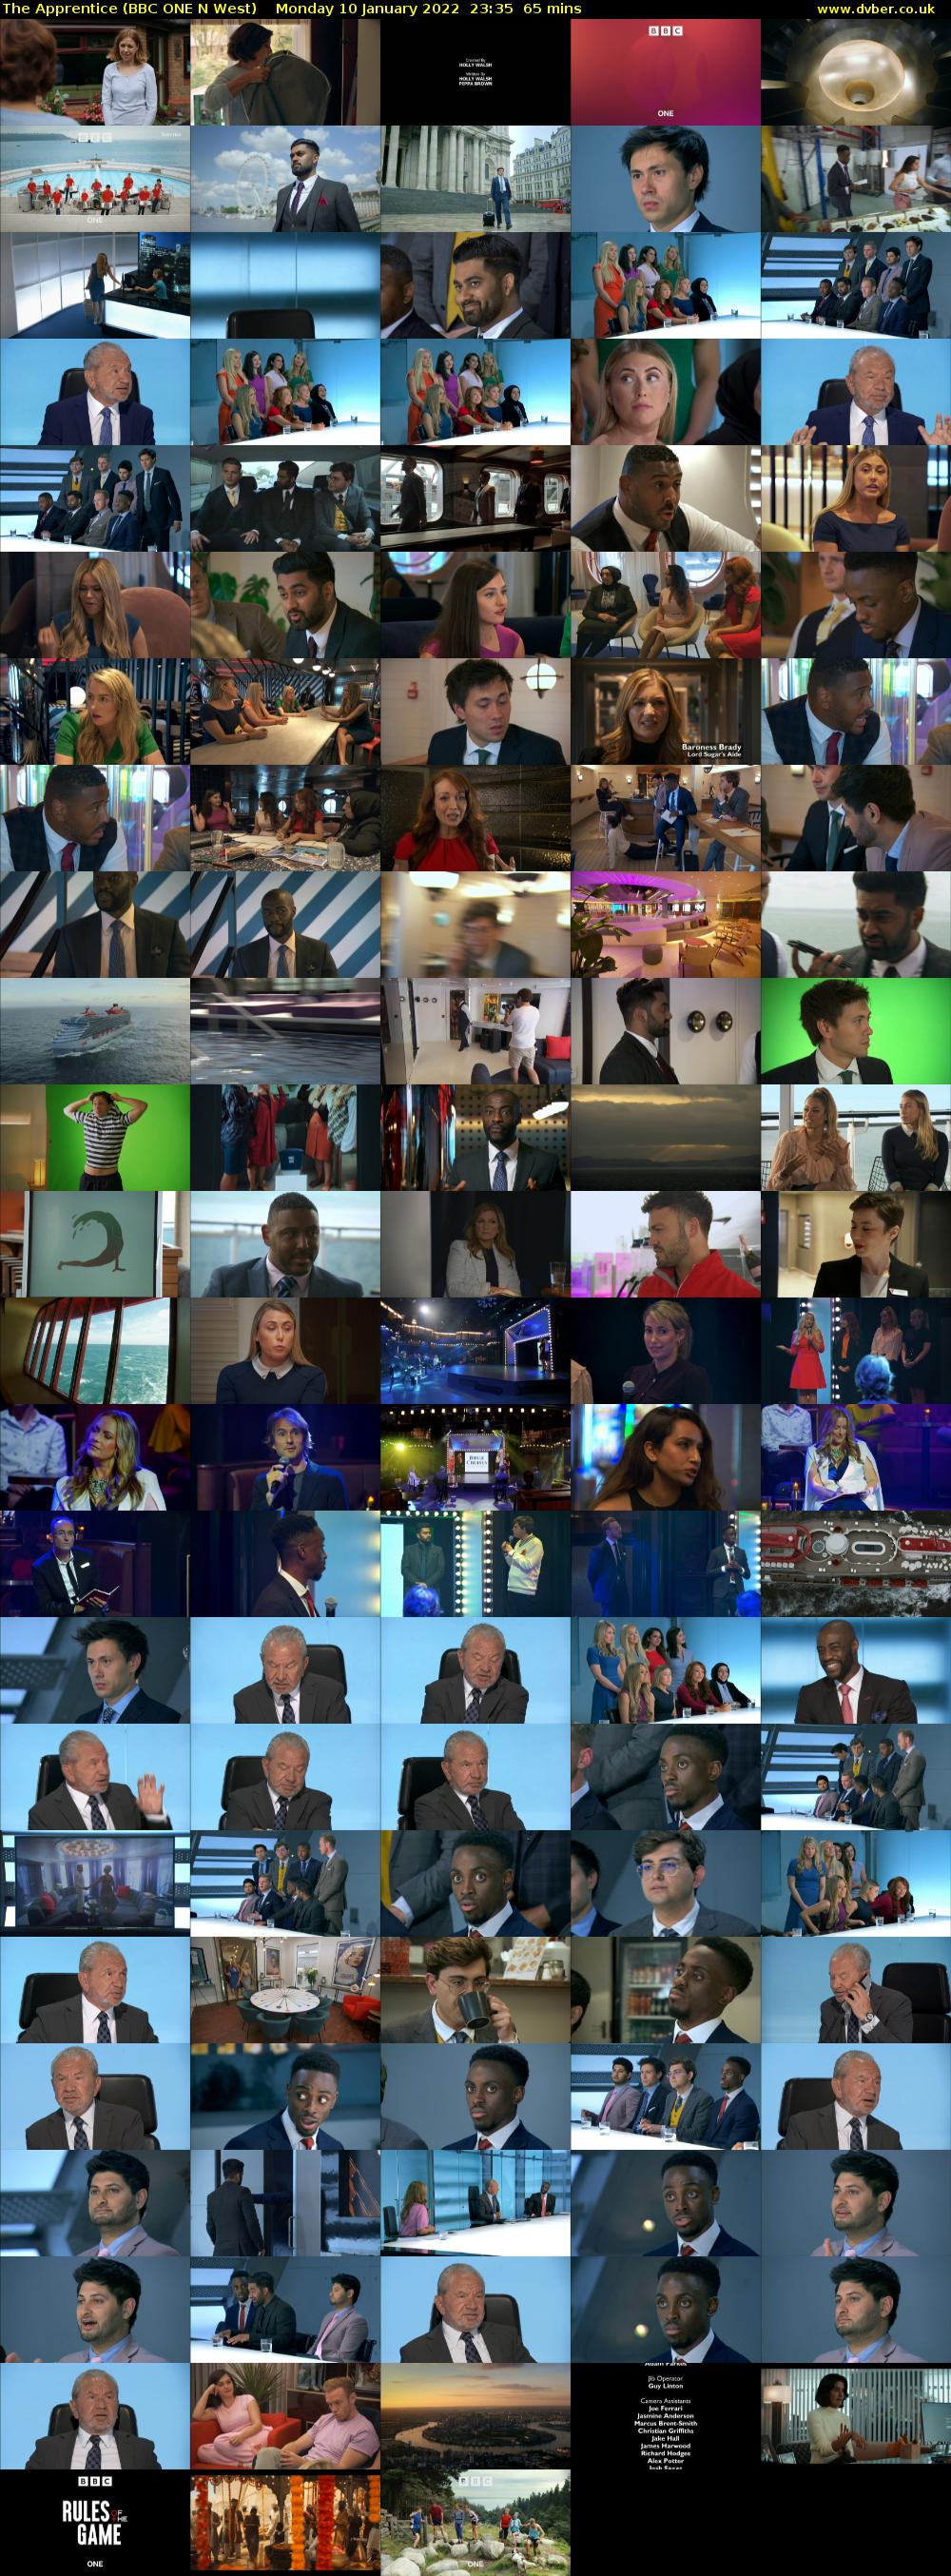 The Apprentice (BBC ONE N West) Monday 10 January 2022 23:35 - 00:40